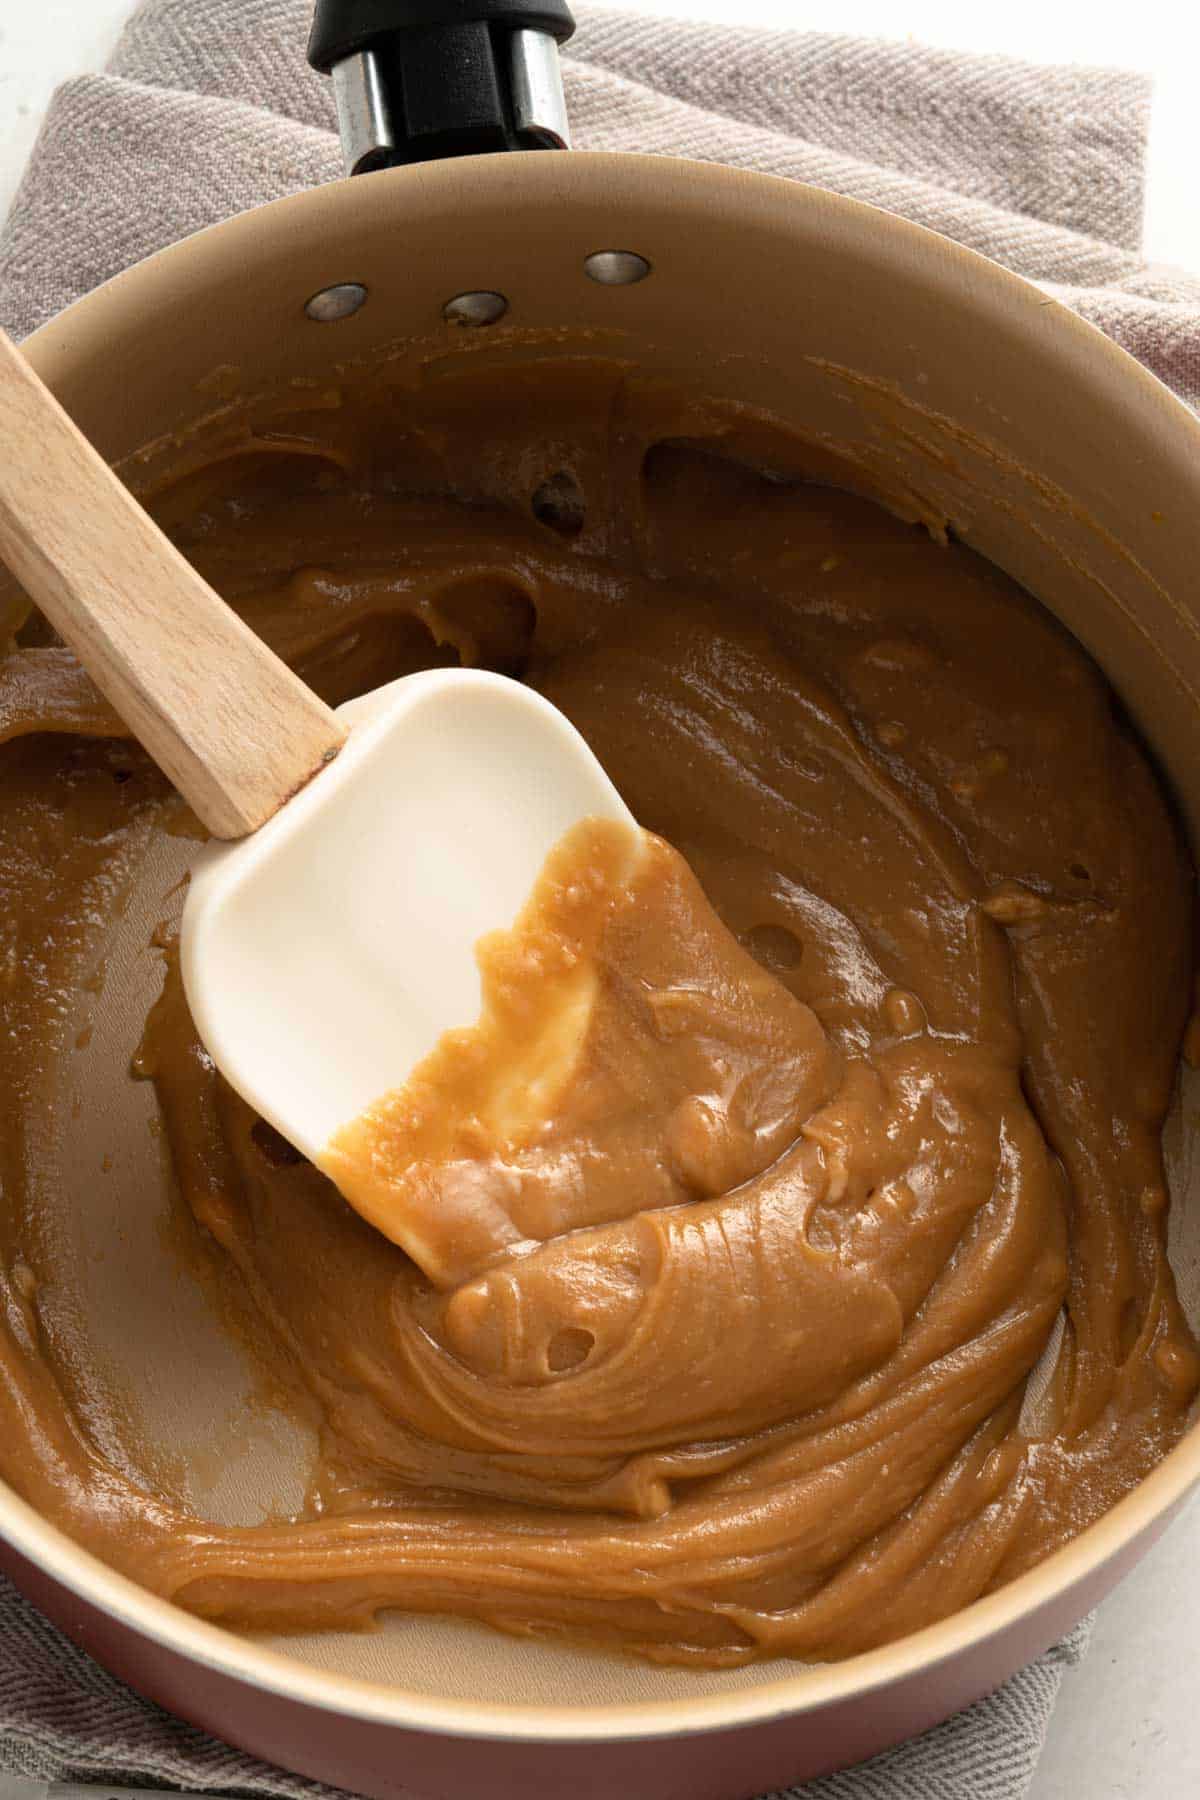 Strirring Maple syrup and nut butter in a saucepan with a rubber spatula.